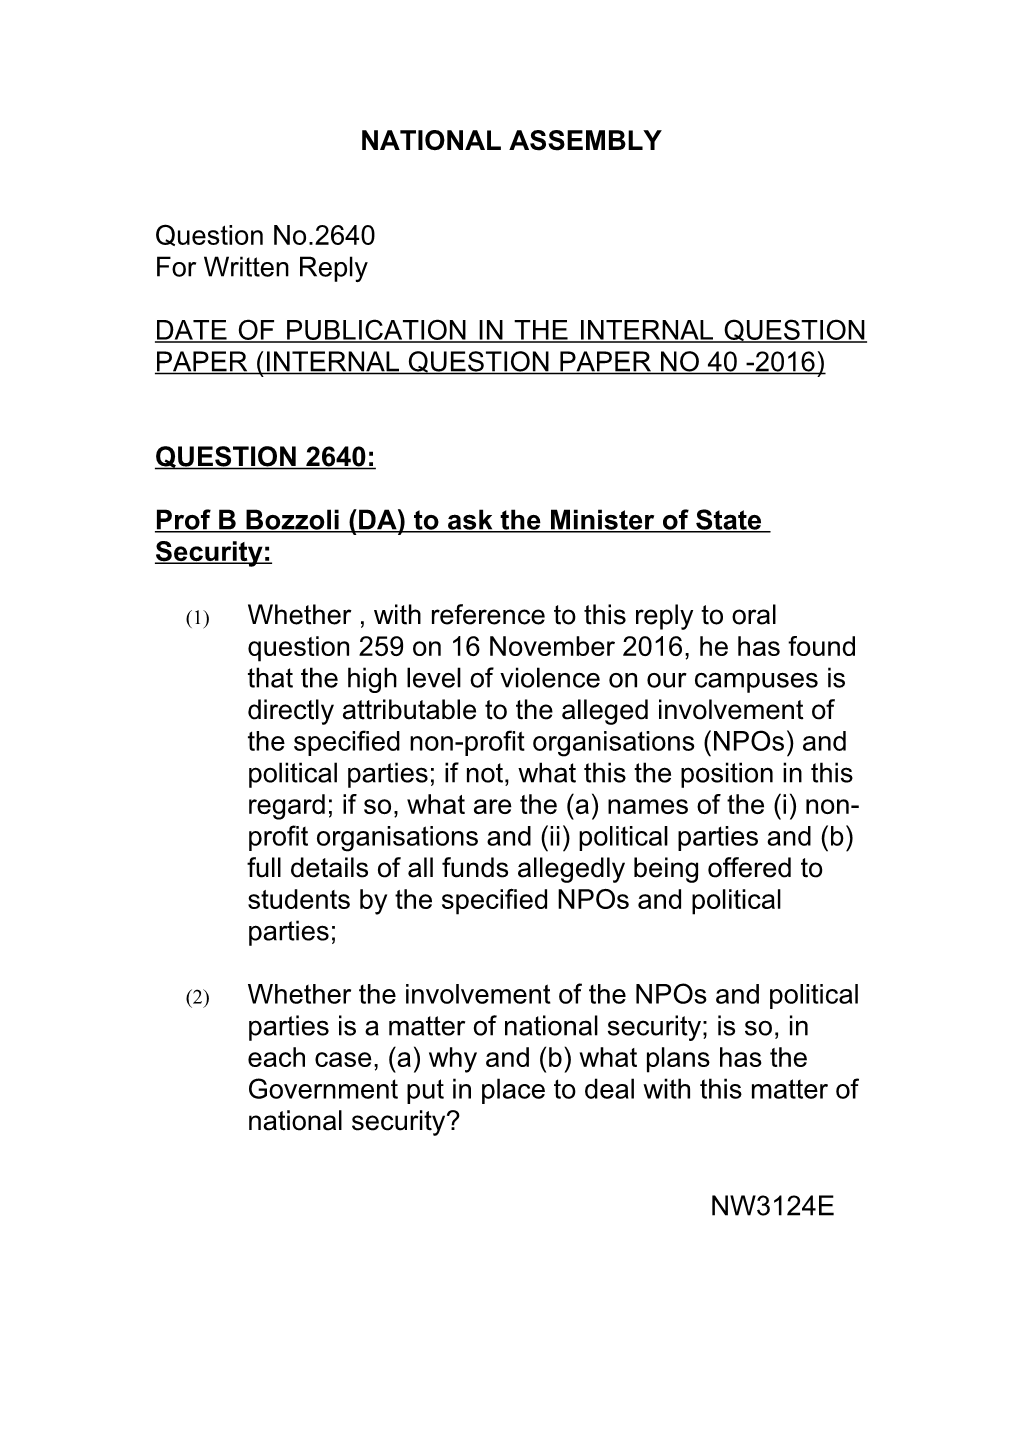 Prof B Bozzoli(DA) to Ask the Minister of State Security